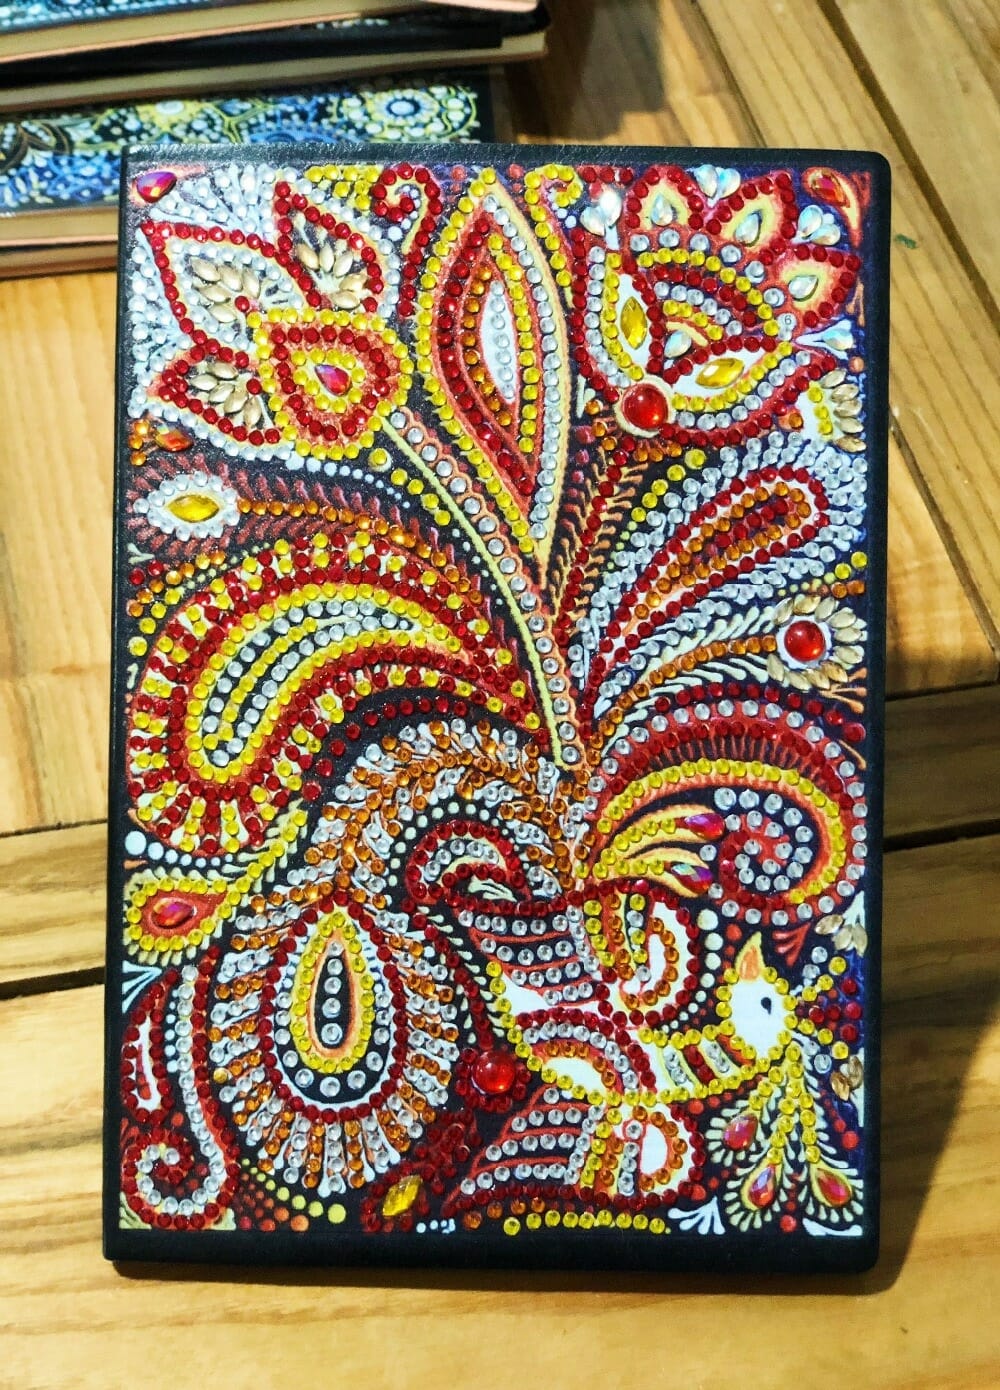 Notebook Diamond Painting 5D Special Shaped Diamond Painting Accessories New Arrival Diamond Embroidery Mosaic Decor Gift